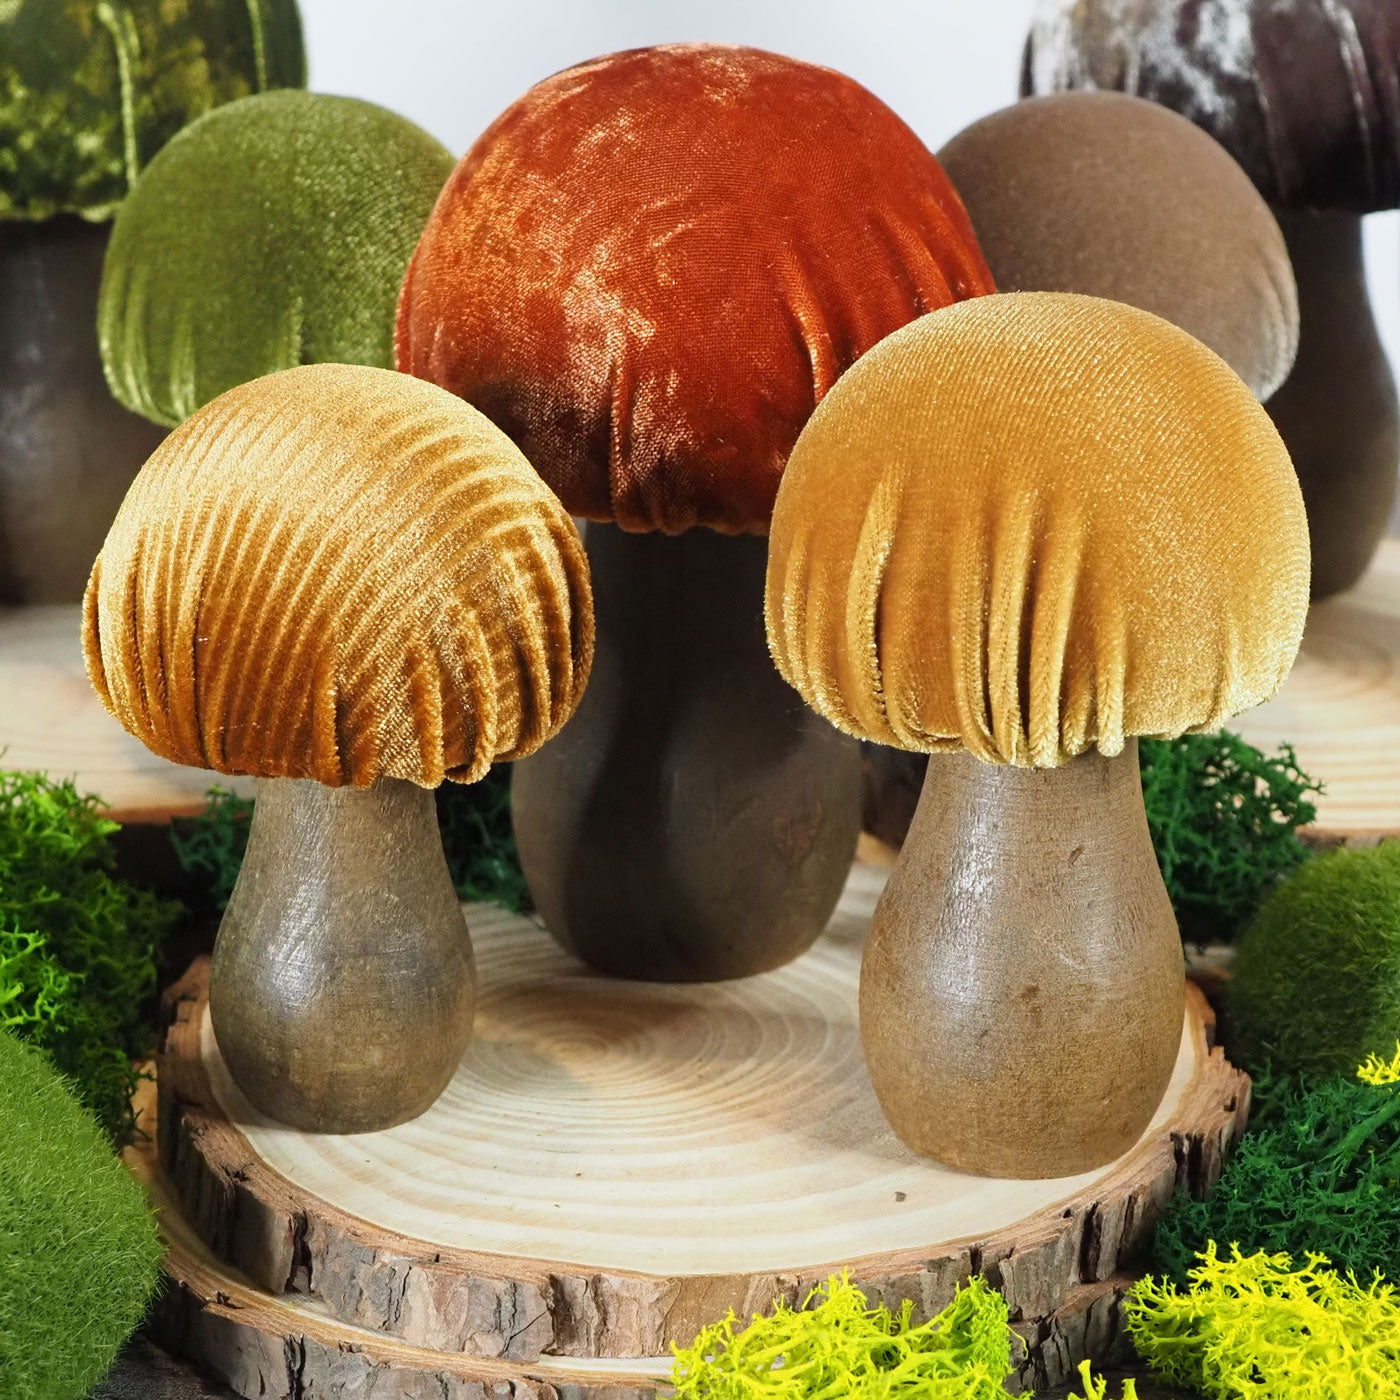 Set of 3 rust-colored orange hand-made decorative mushrooms with different shades of velvet tops and wooden bases